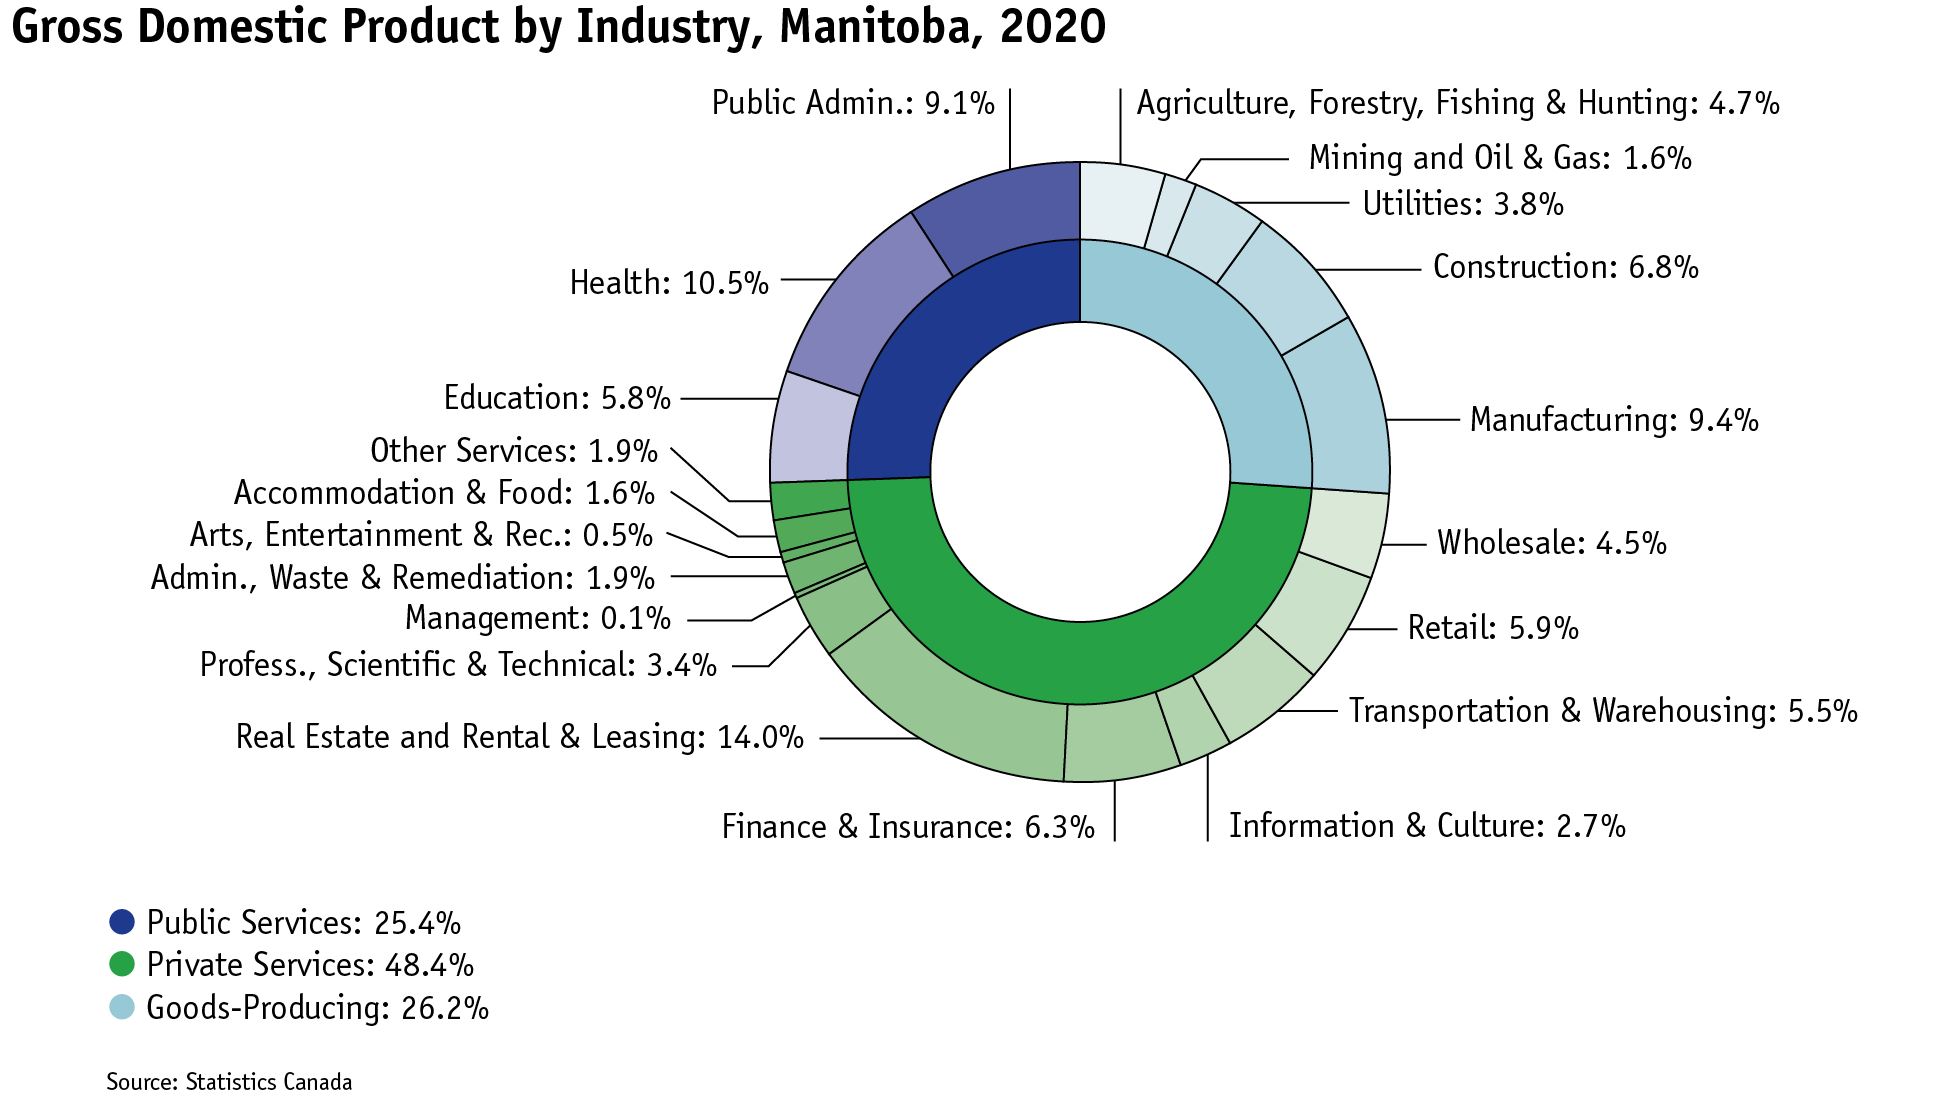 A double pie chart that shows GDP by economic sector (public services, private services, and goods producing) in the inner pie and GDP by industry in the outer pie.